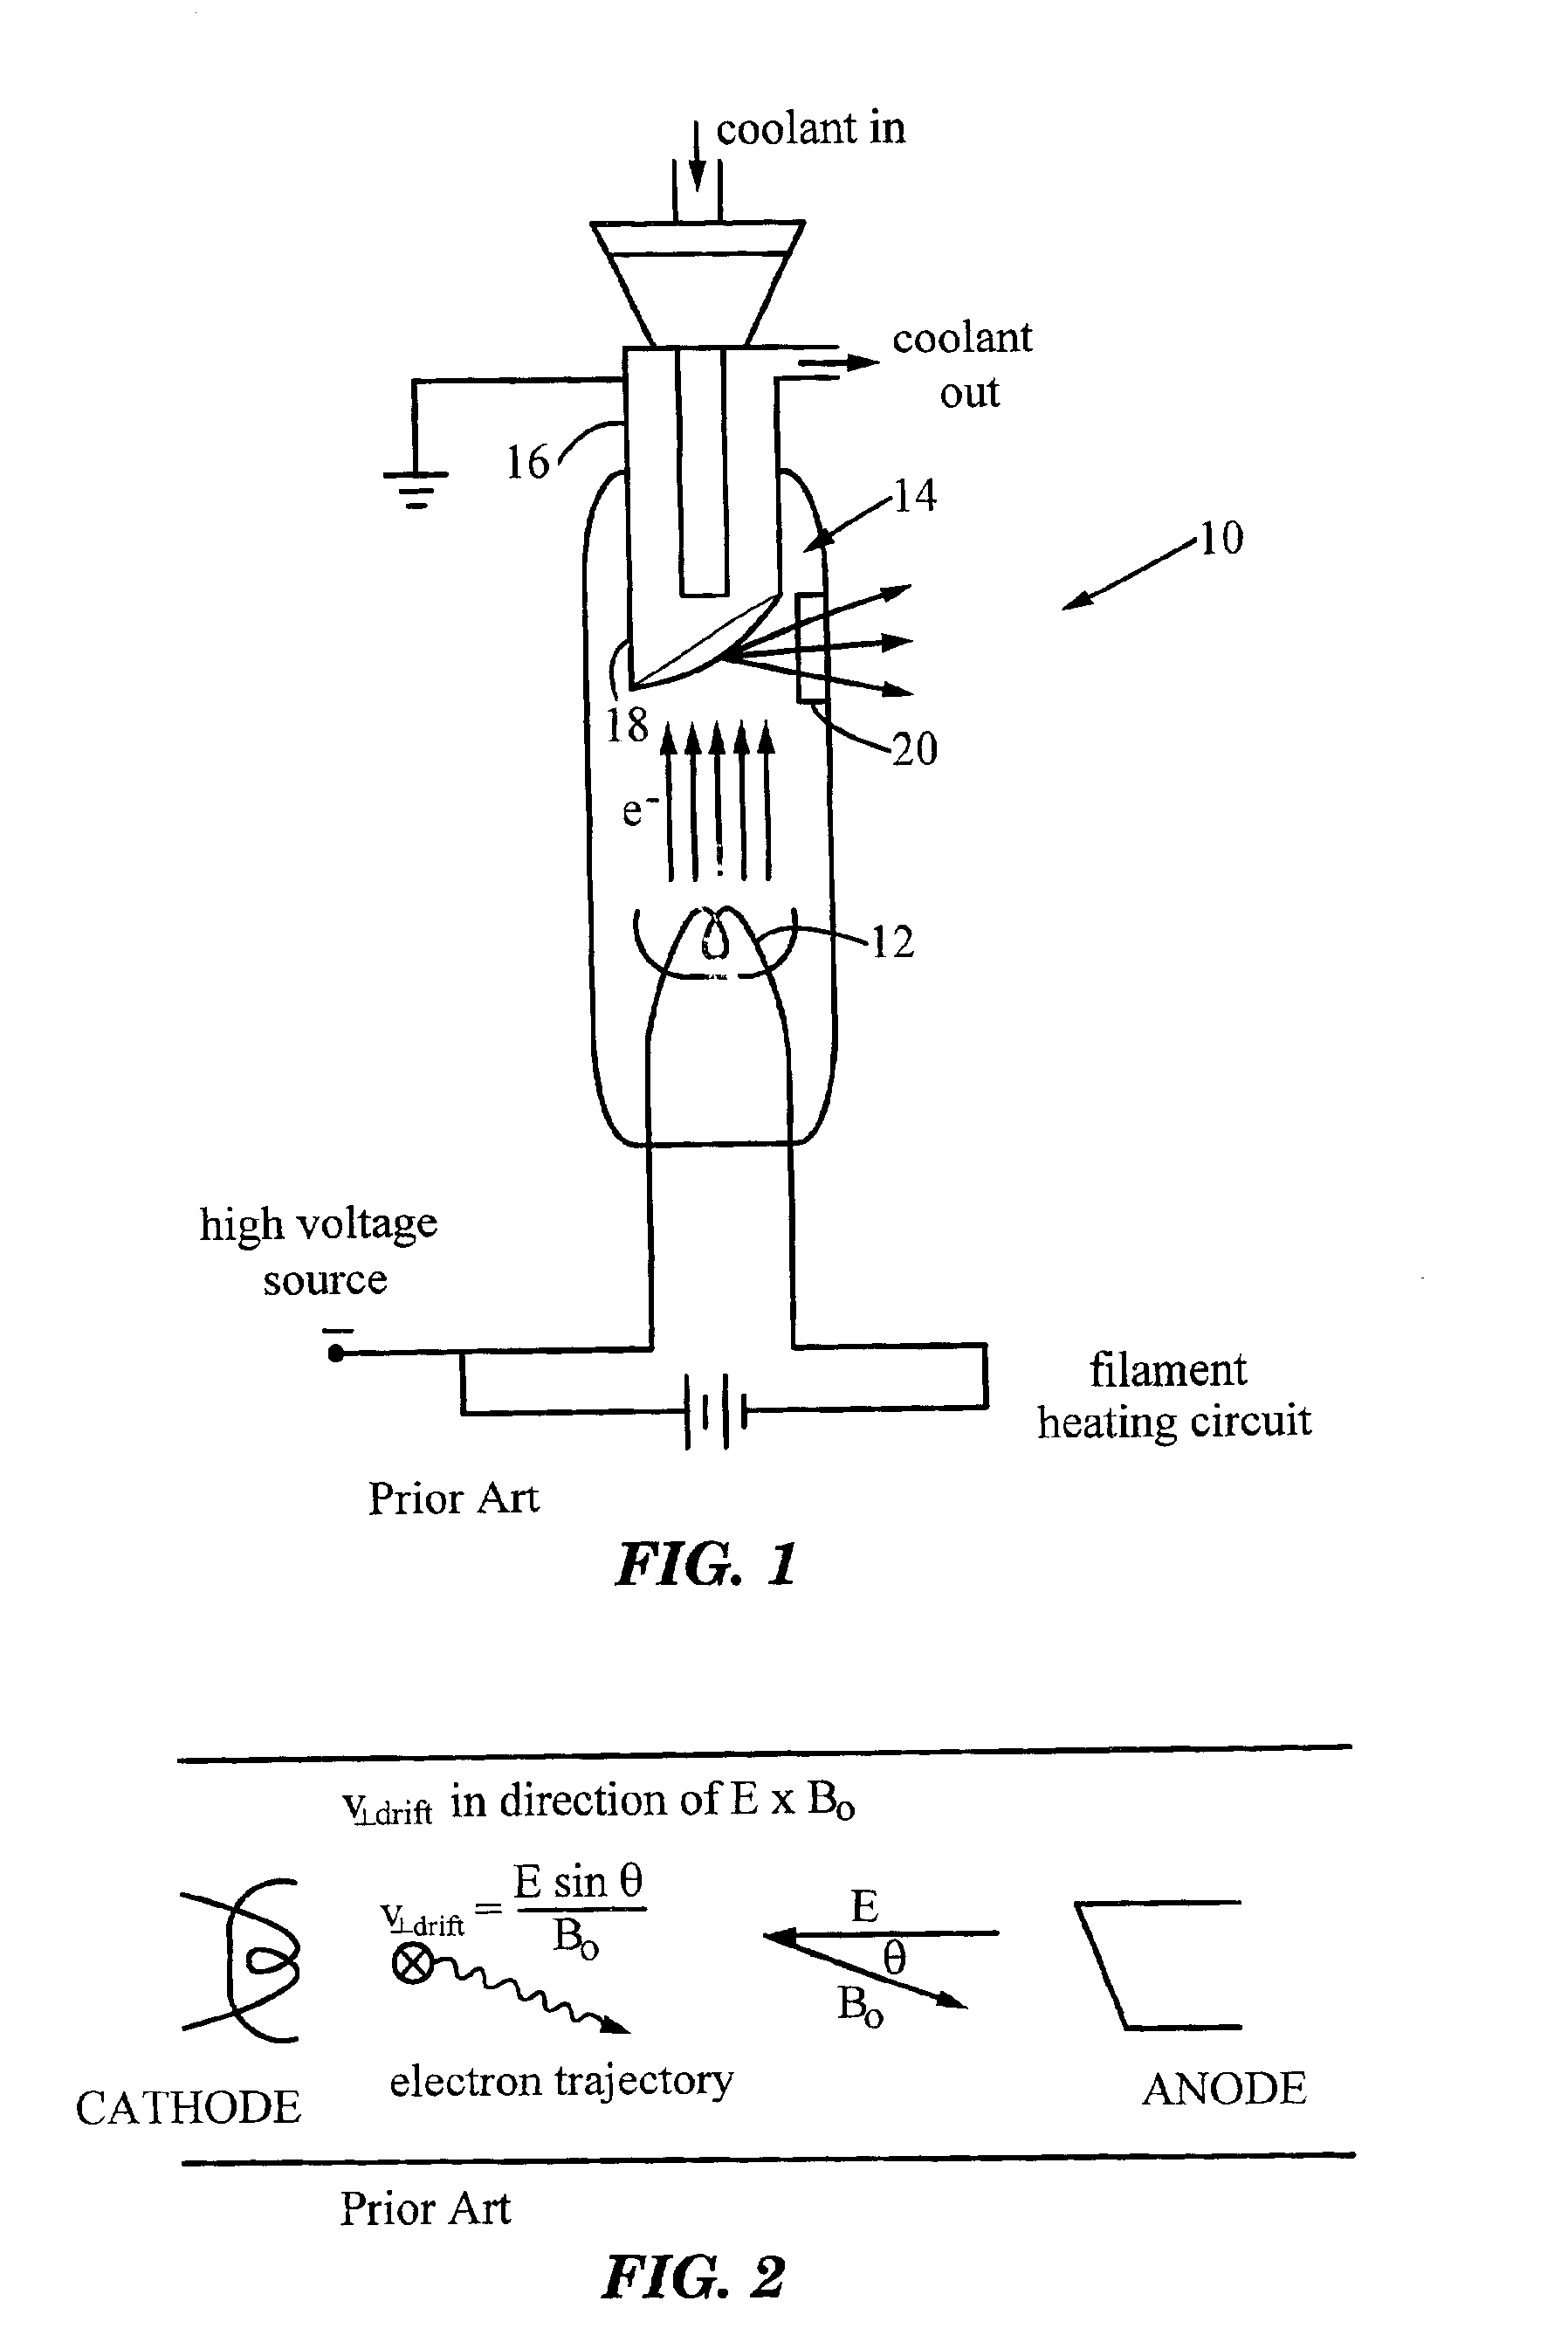 Modified X-ray tube for use in the presence of magnetic fields